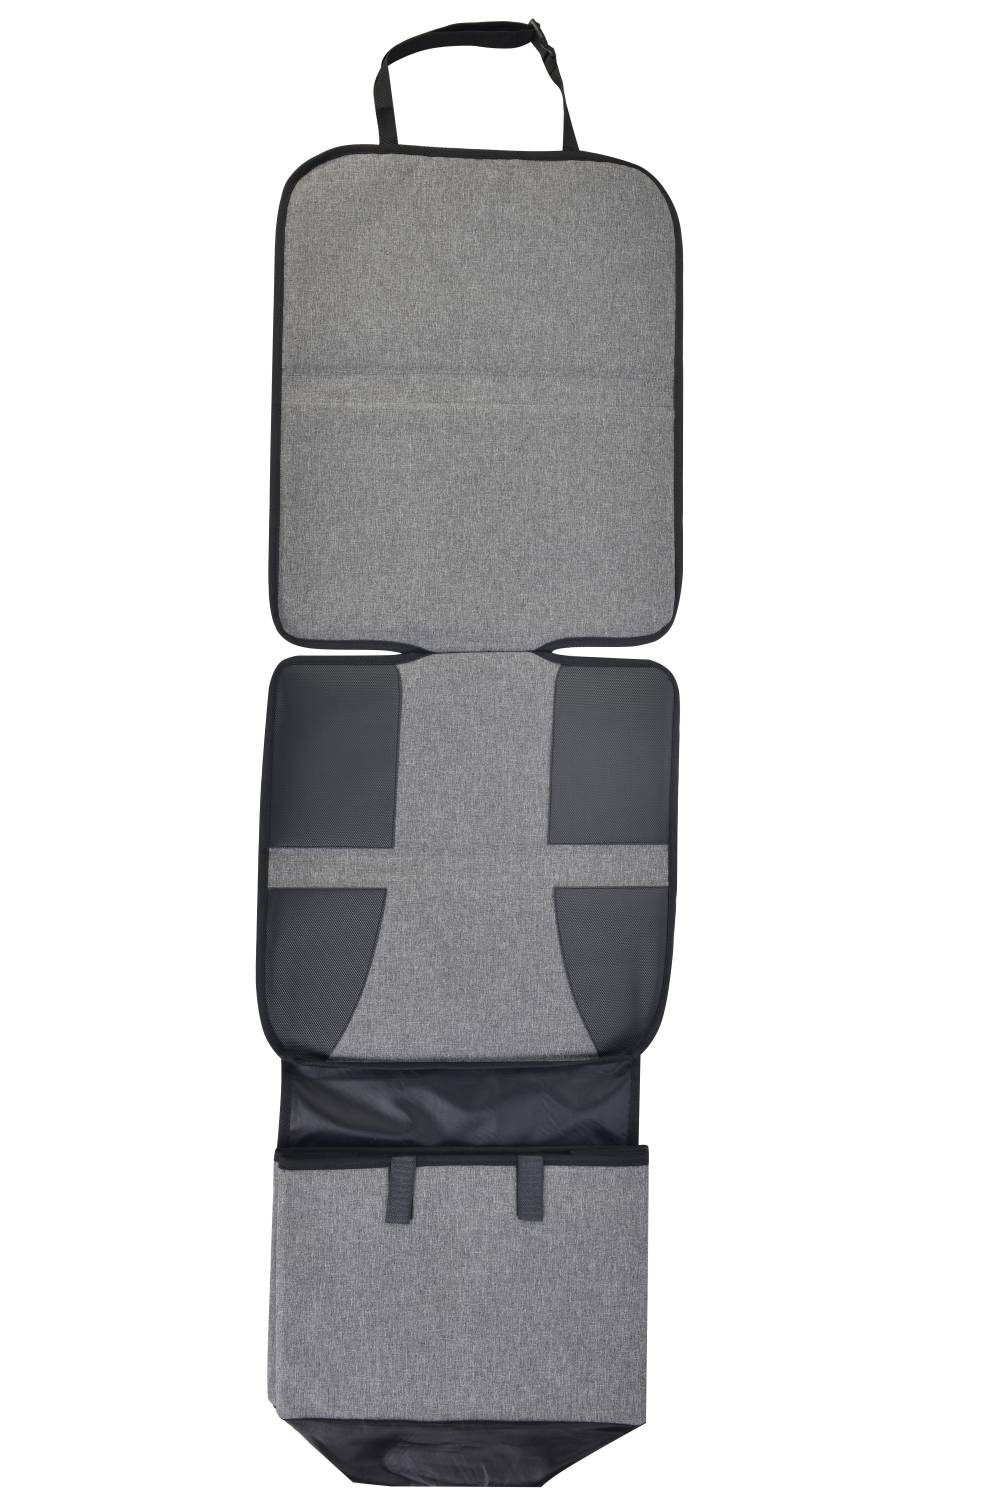 Altabebe Seat Cover with Footrest